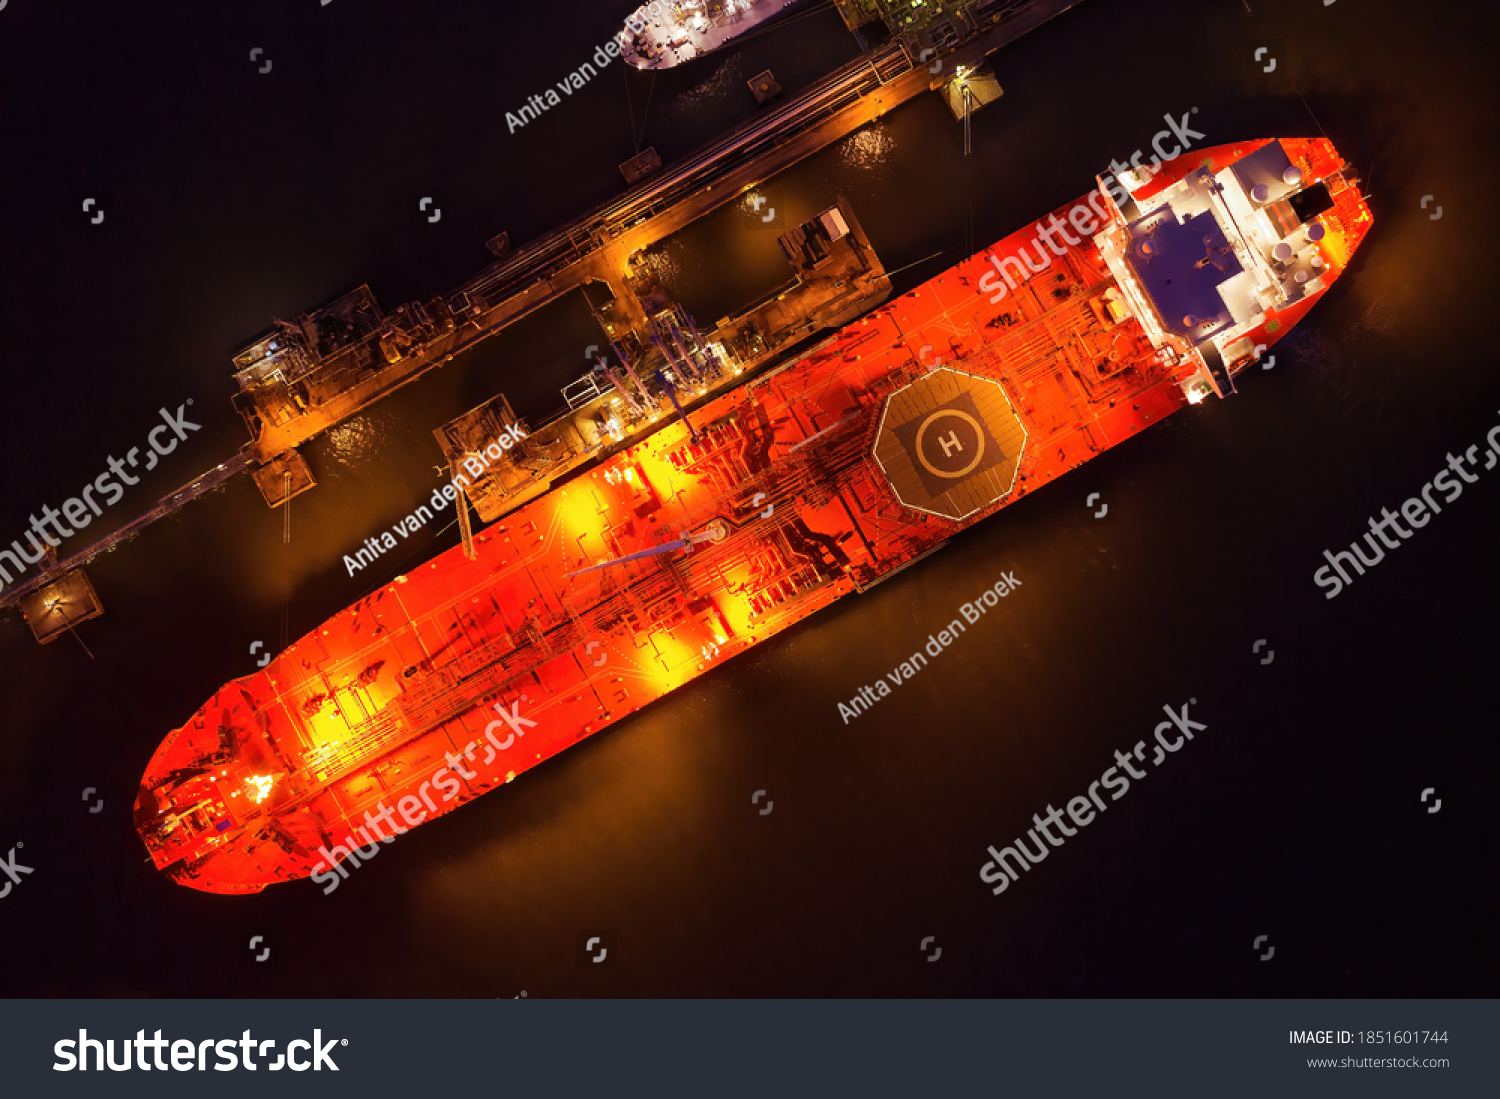 Crude oil shuttle tanker docked at night wtih light on creating an atmospheric glow with space for text. #1851601744